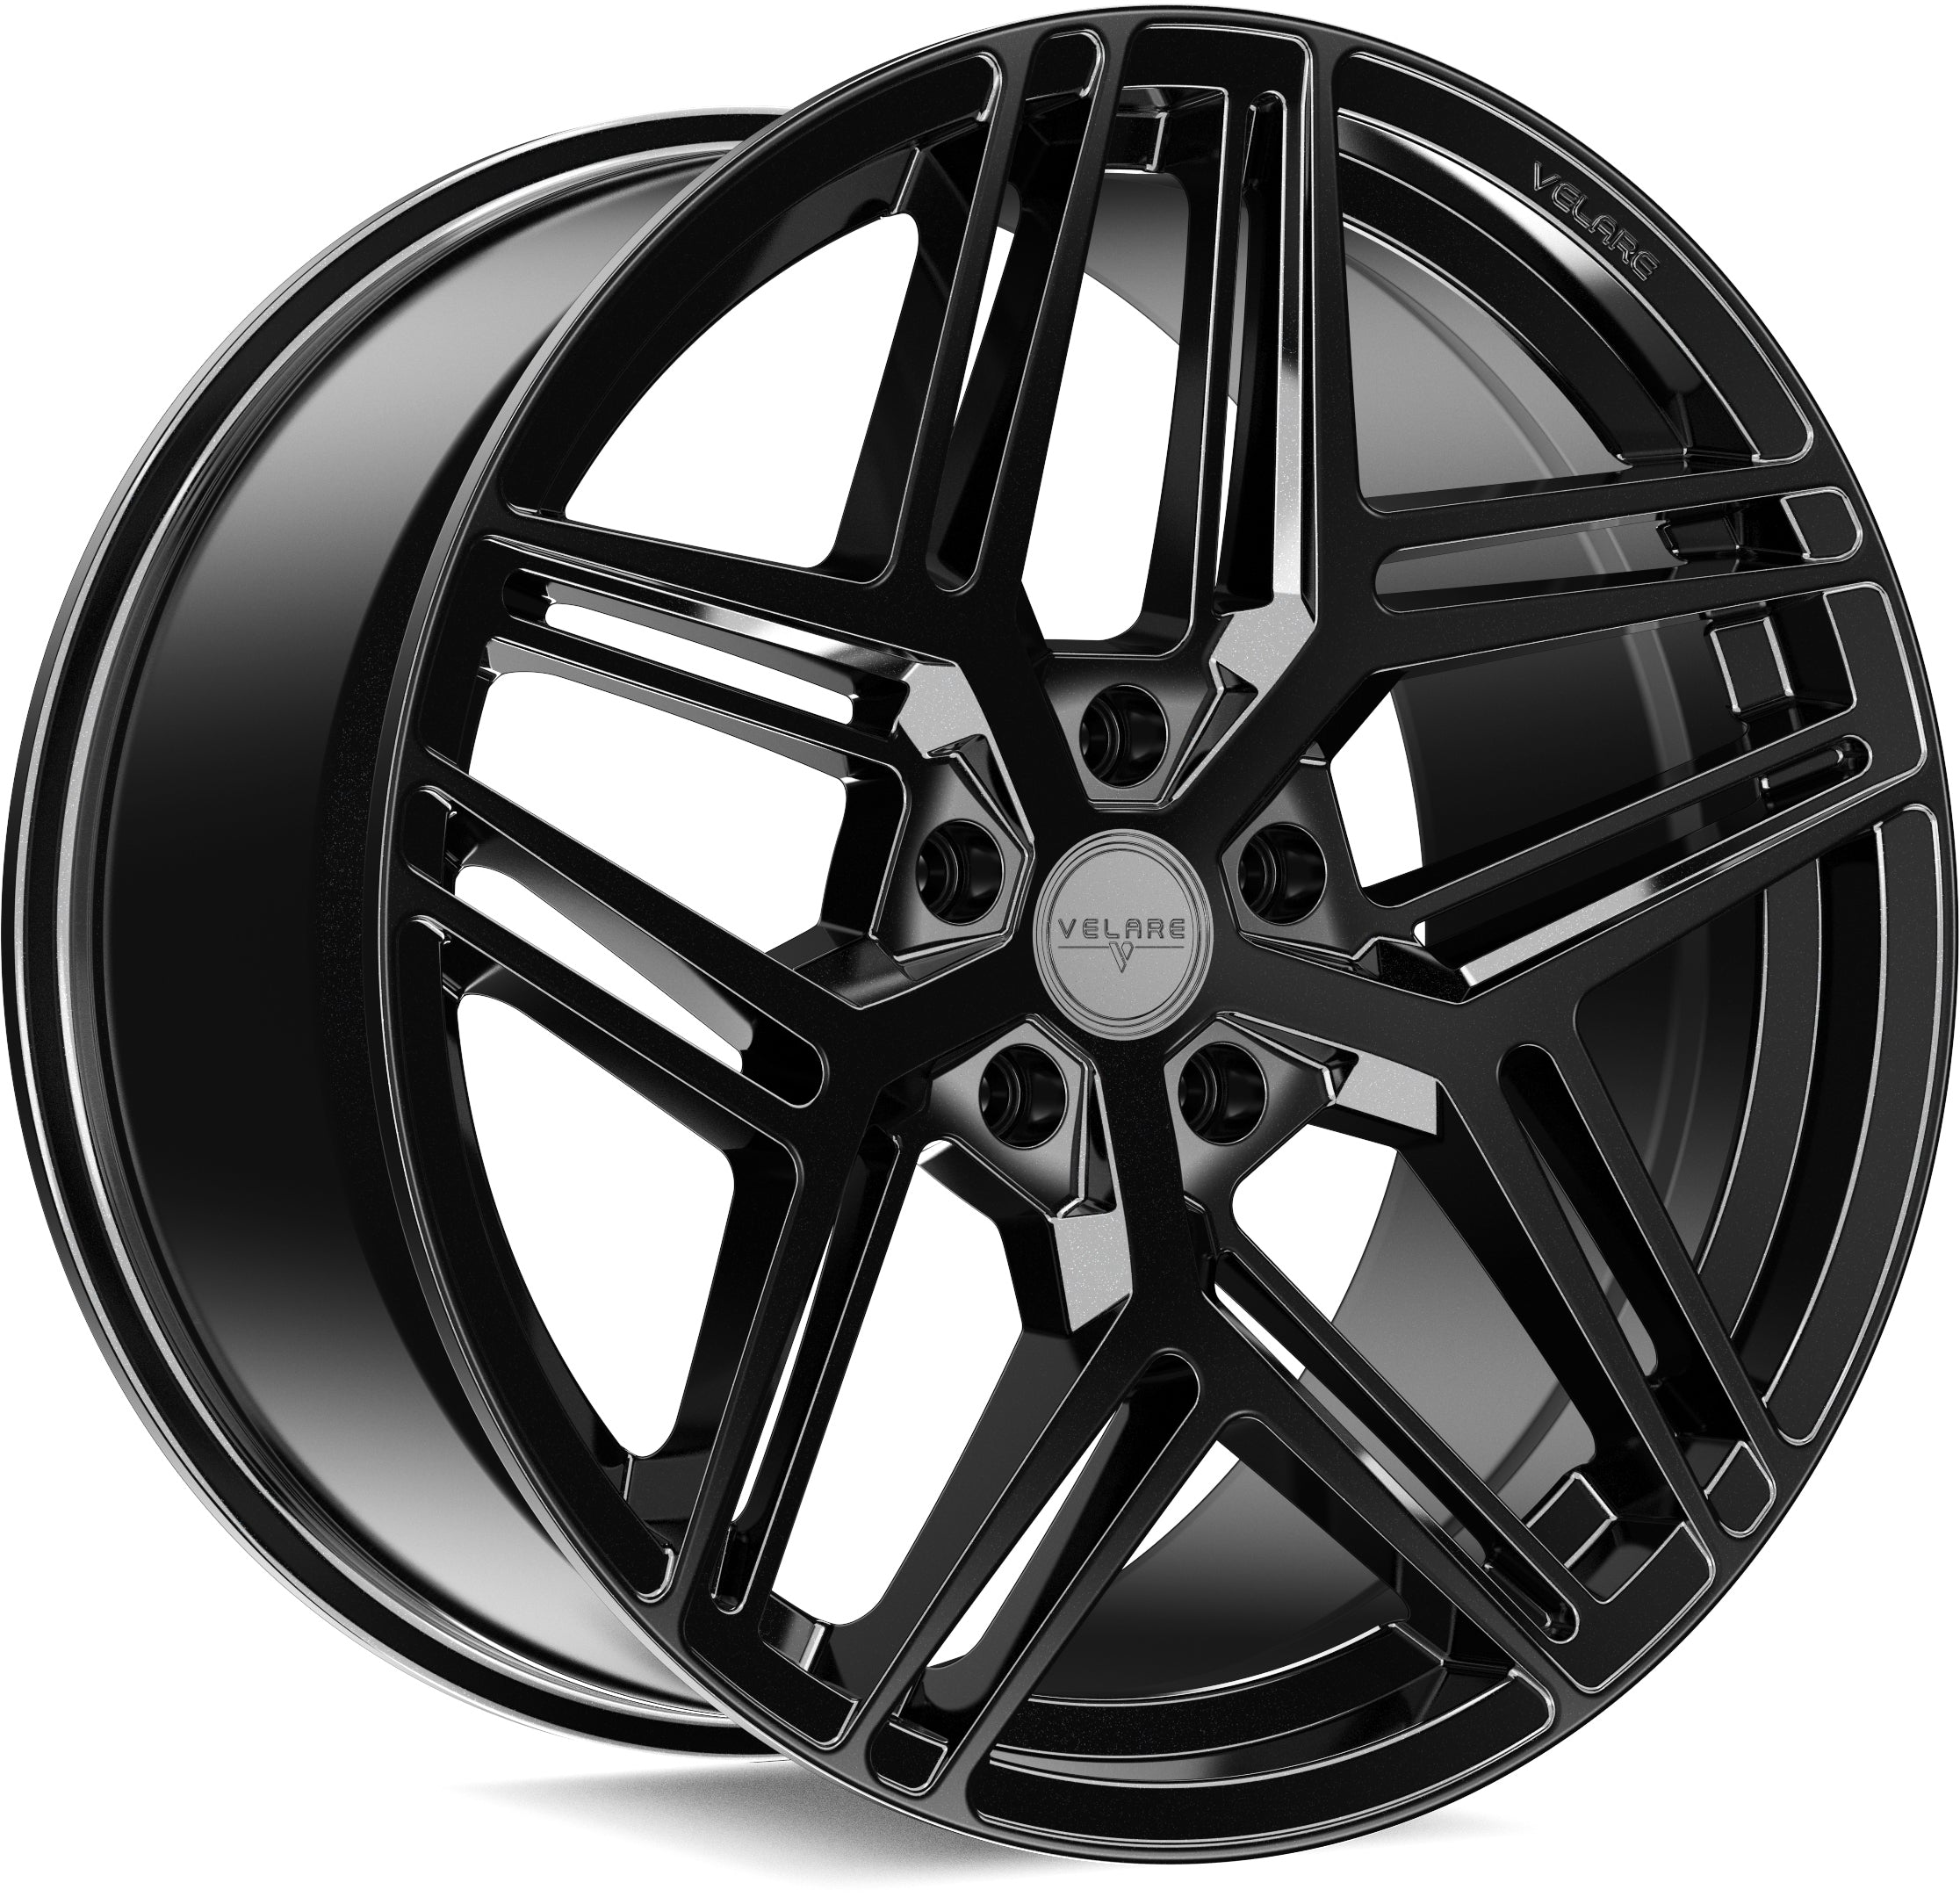 VLR16 Wheel and Tyre Package